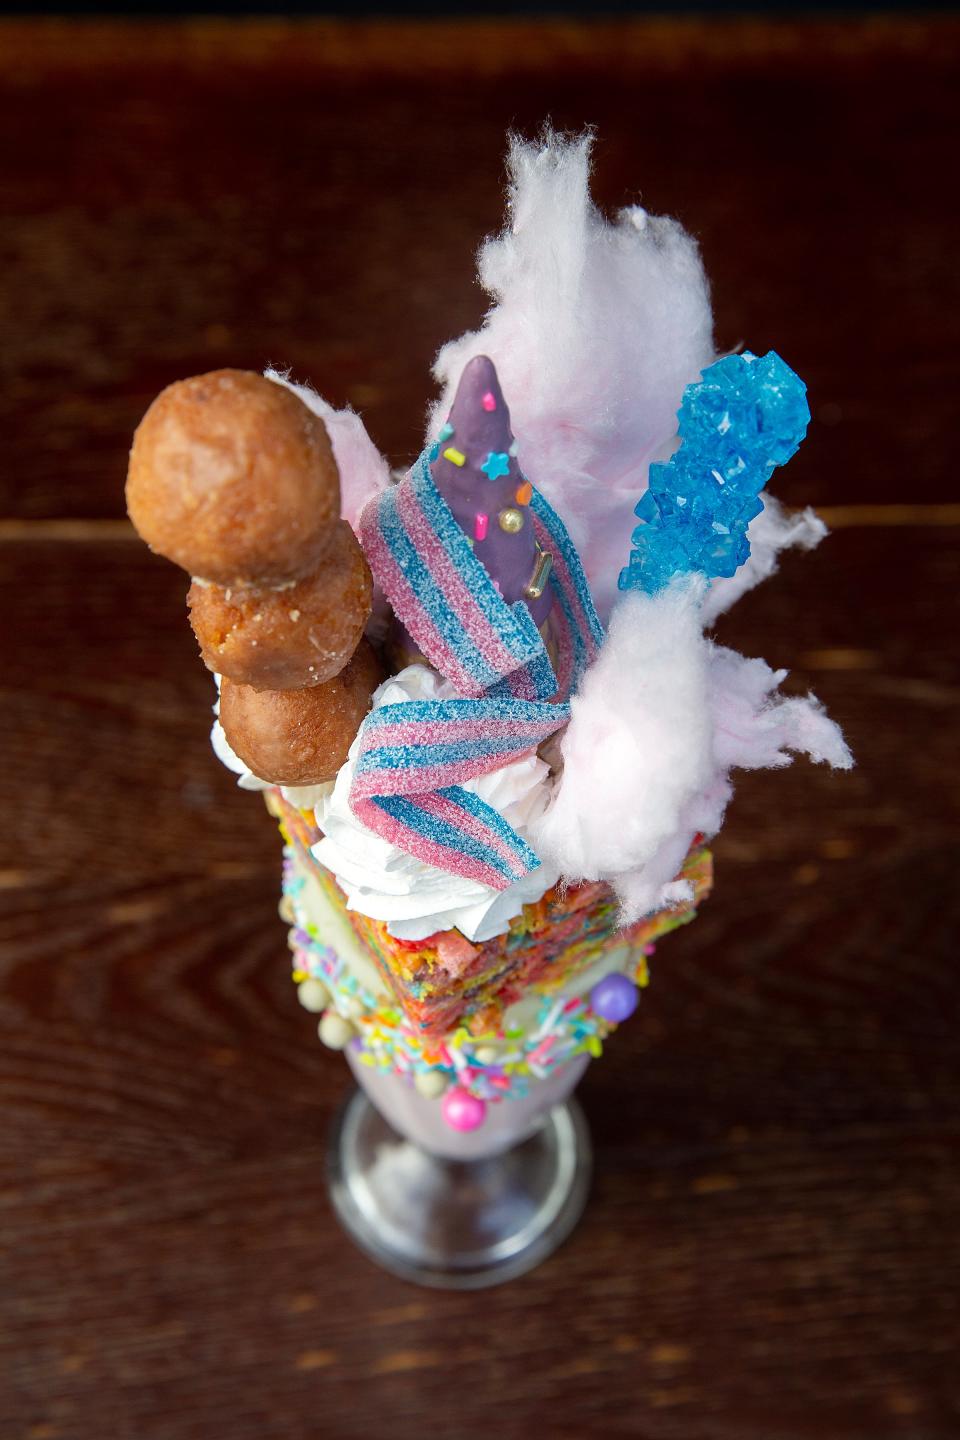 Unicornation, a strawberry milkshake with sprinkles, donut holes, a Fruity Pebble crispy treat, sugar cone, whipped cream, rock candy and cotton candy, at The Loaded Spoon.